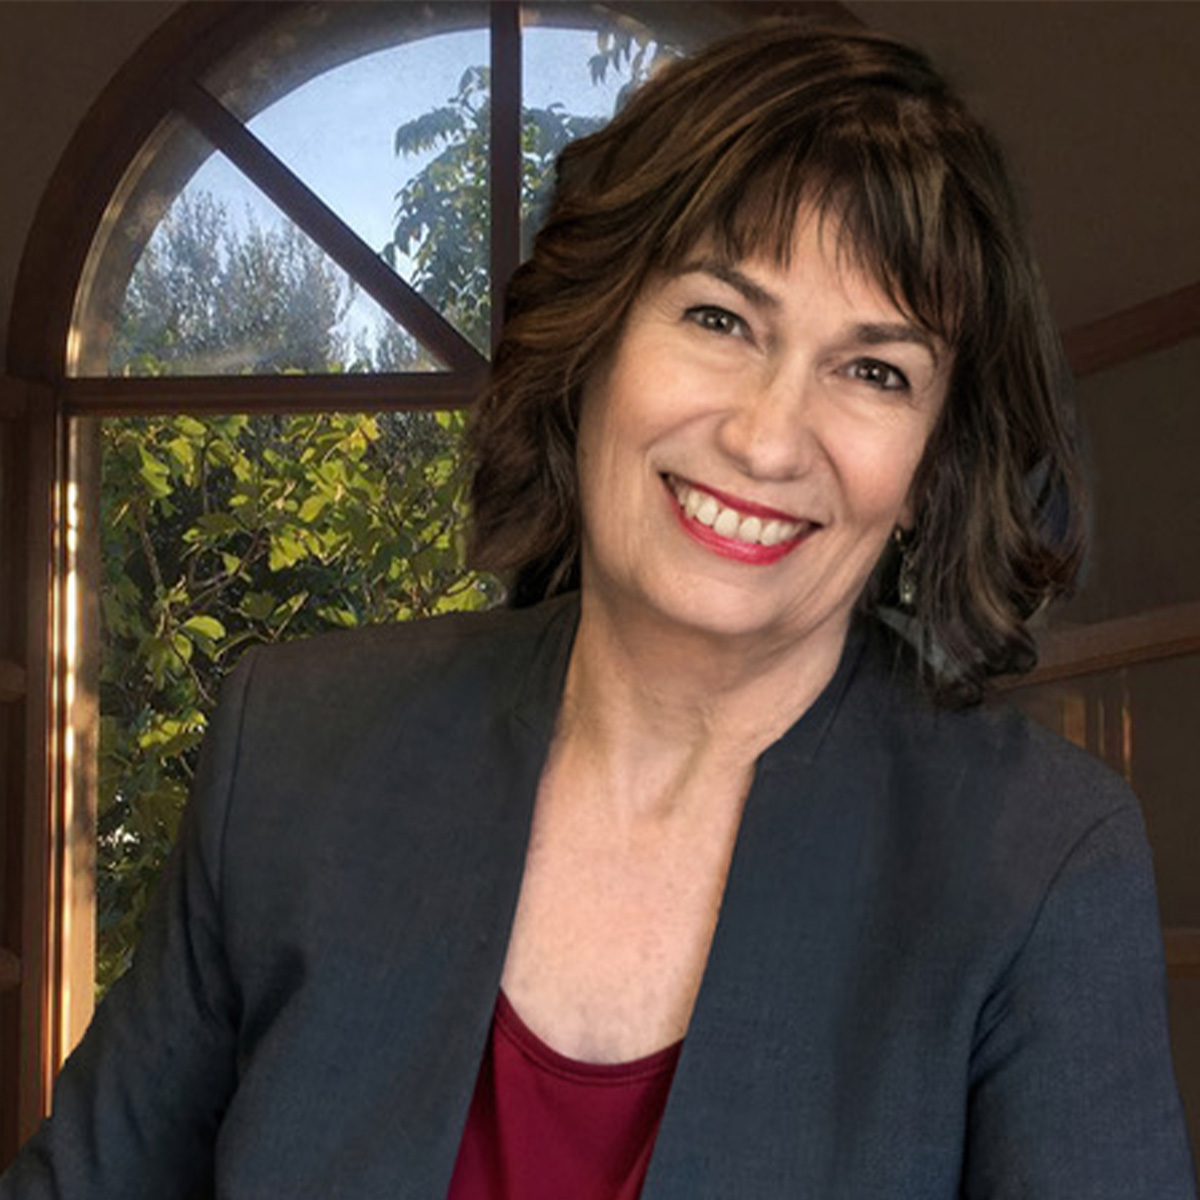 Leslie Davenport color portrait. Leslie is an older, white woman with dark brown short, wavy hair. She is smiling, wearing a dark gray-colored blazer and dark red top. She is posed in front of a large window with trees outside.